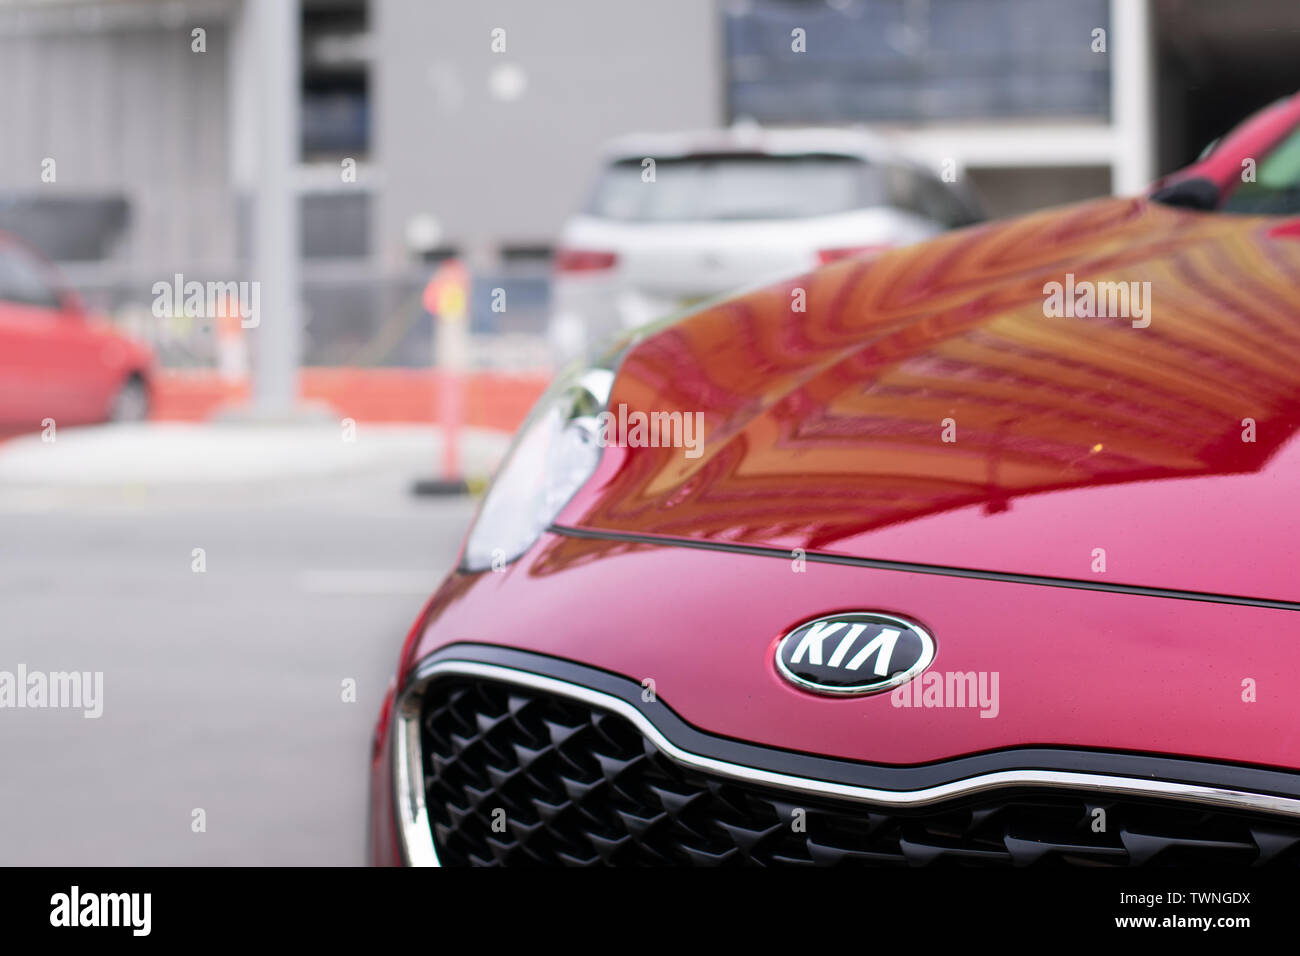 Kia logo on red car in the city Stock Photo